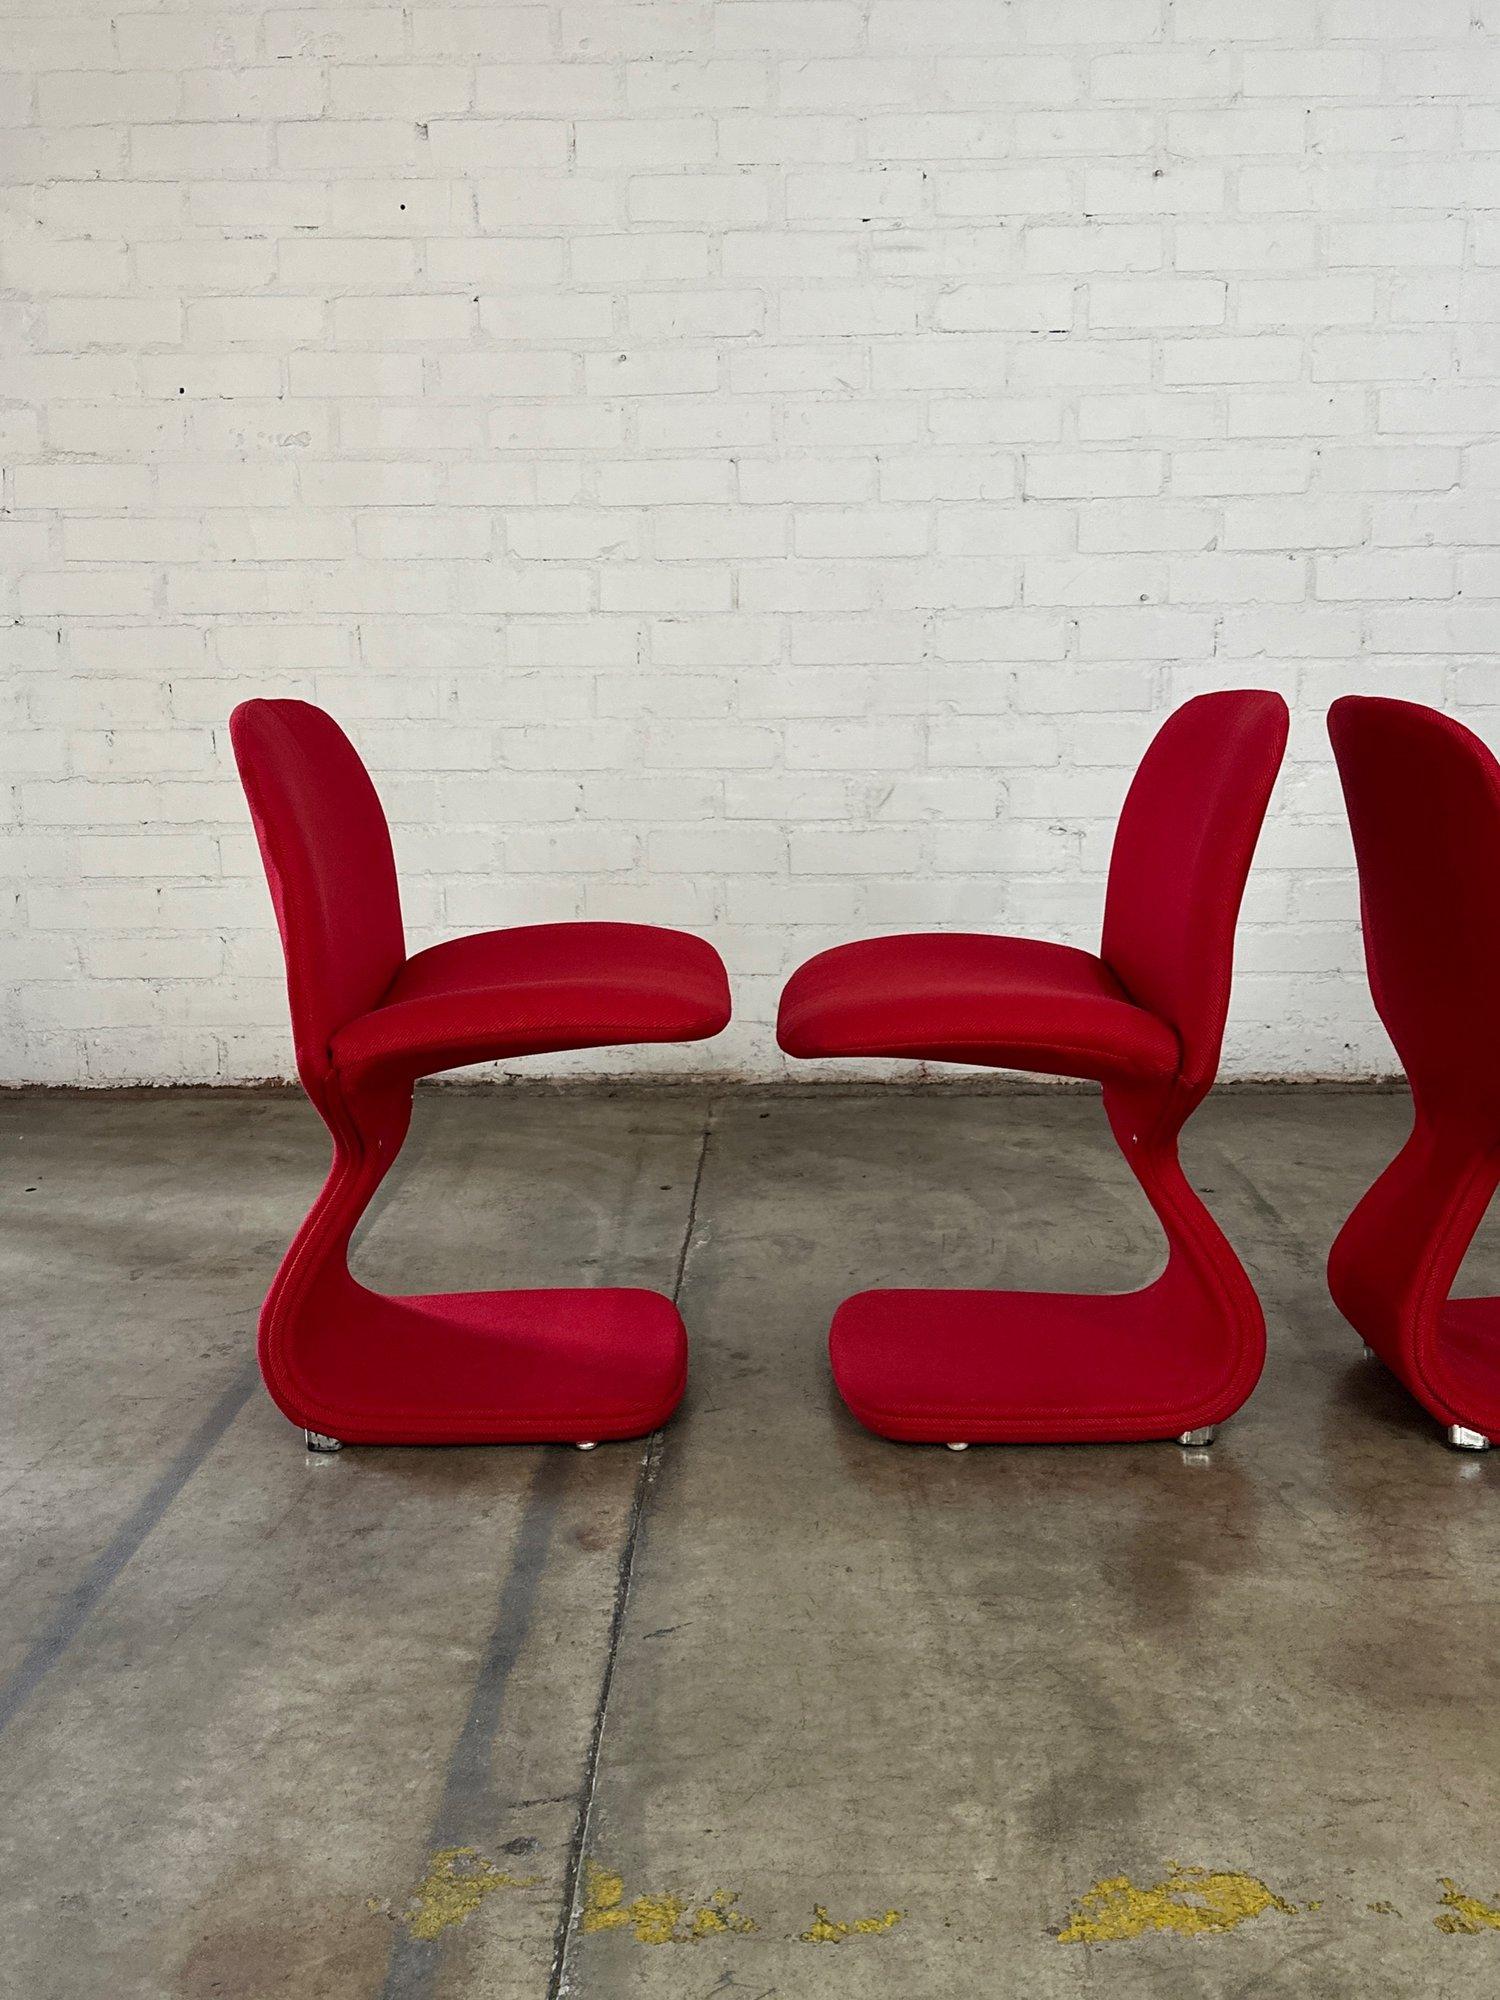 Fabric Italian Cantilevered Chairs by Joe Colombo - set of four For Sale